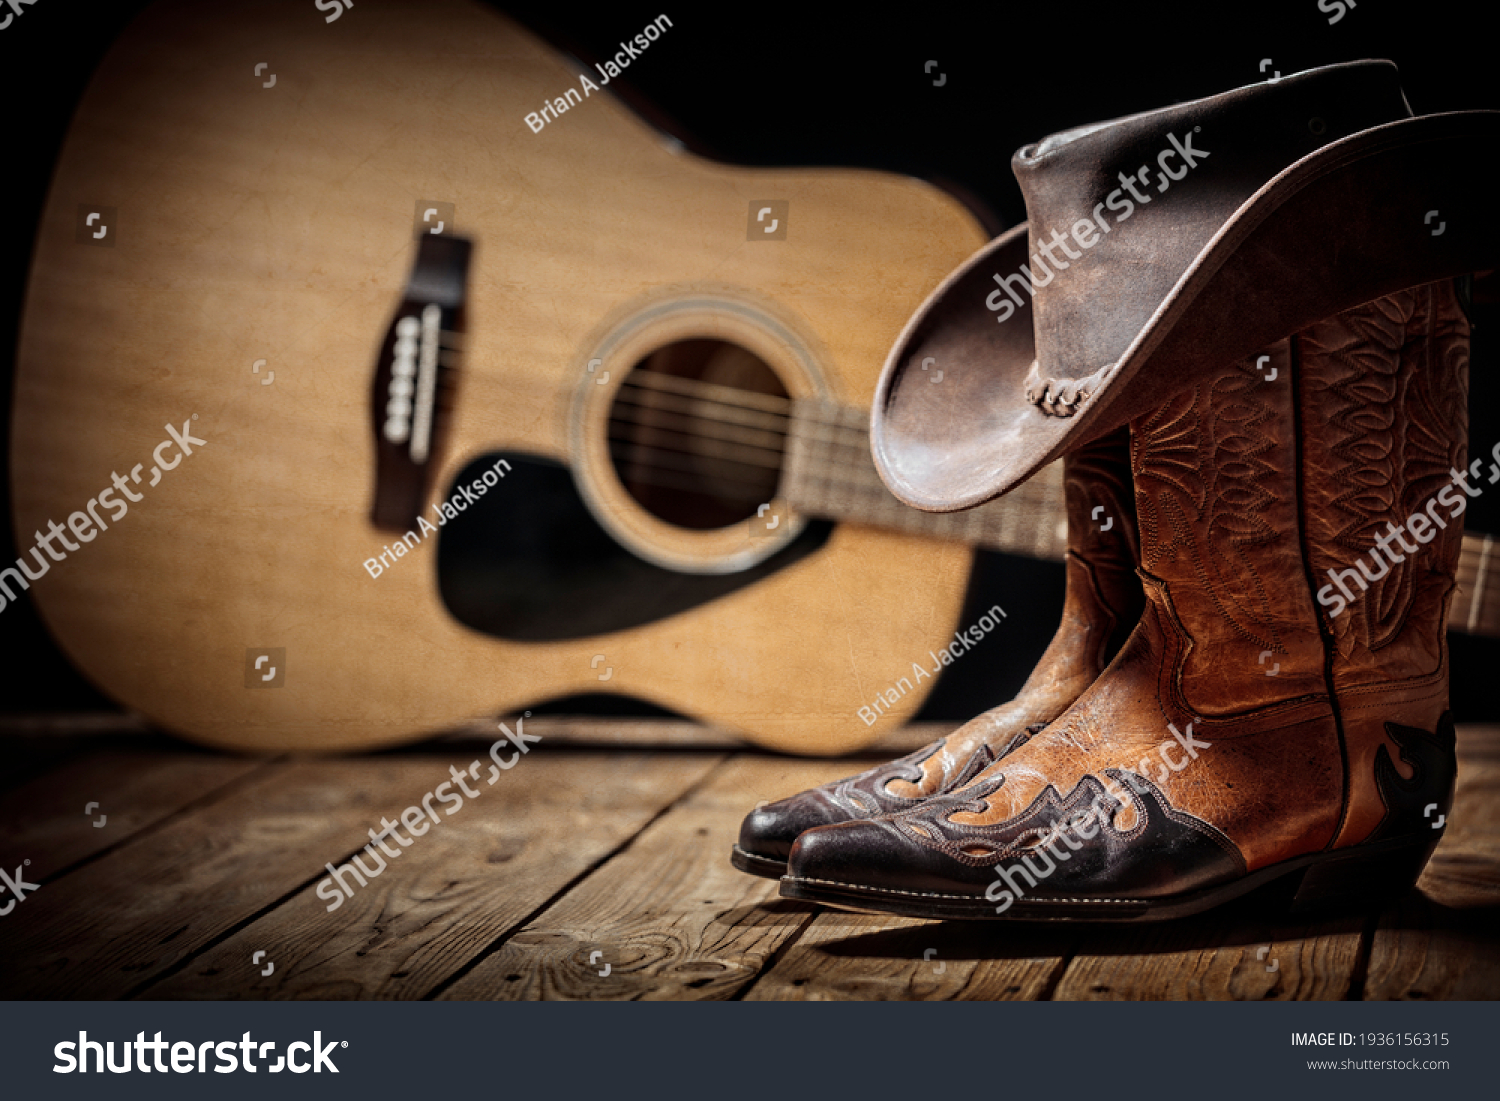 Country music festival live concert with acoustic guitar, cowboy hat and boots background #1936156315